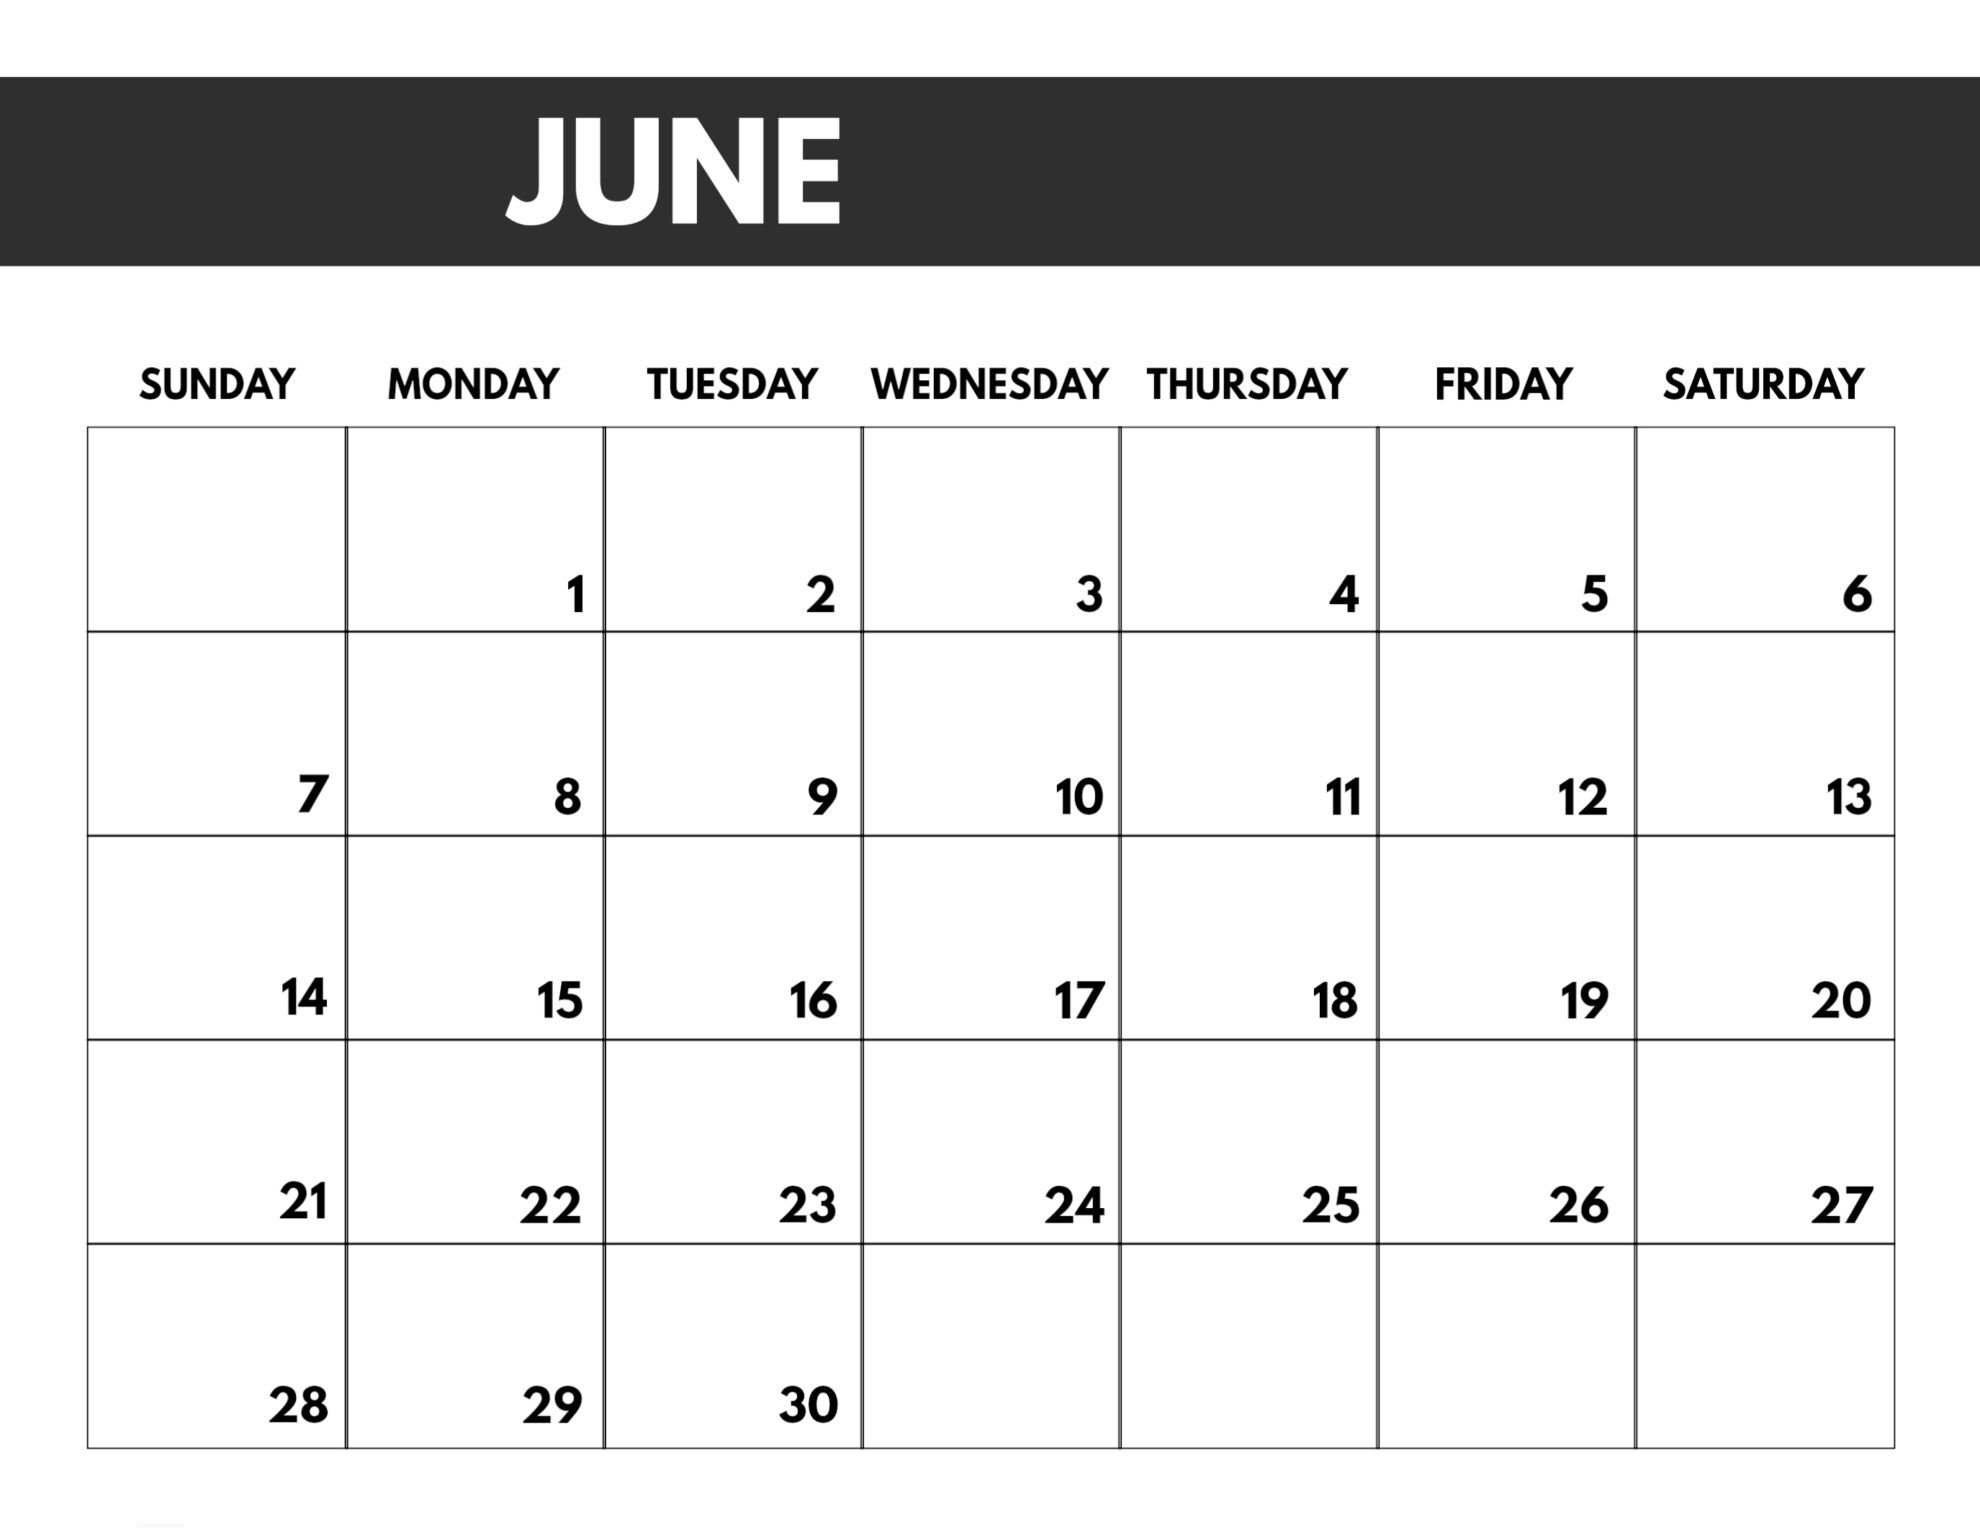 2020 Free Monthly Calendar Template - Paper Trail Design